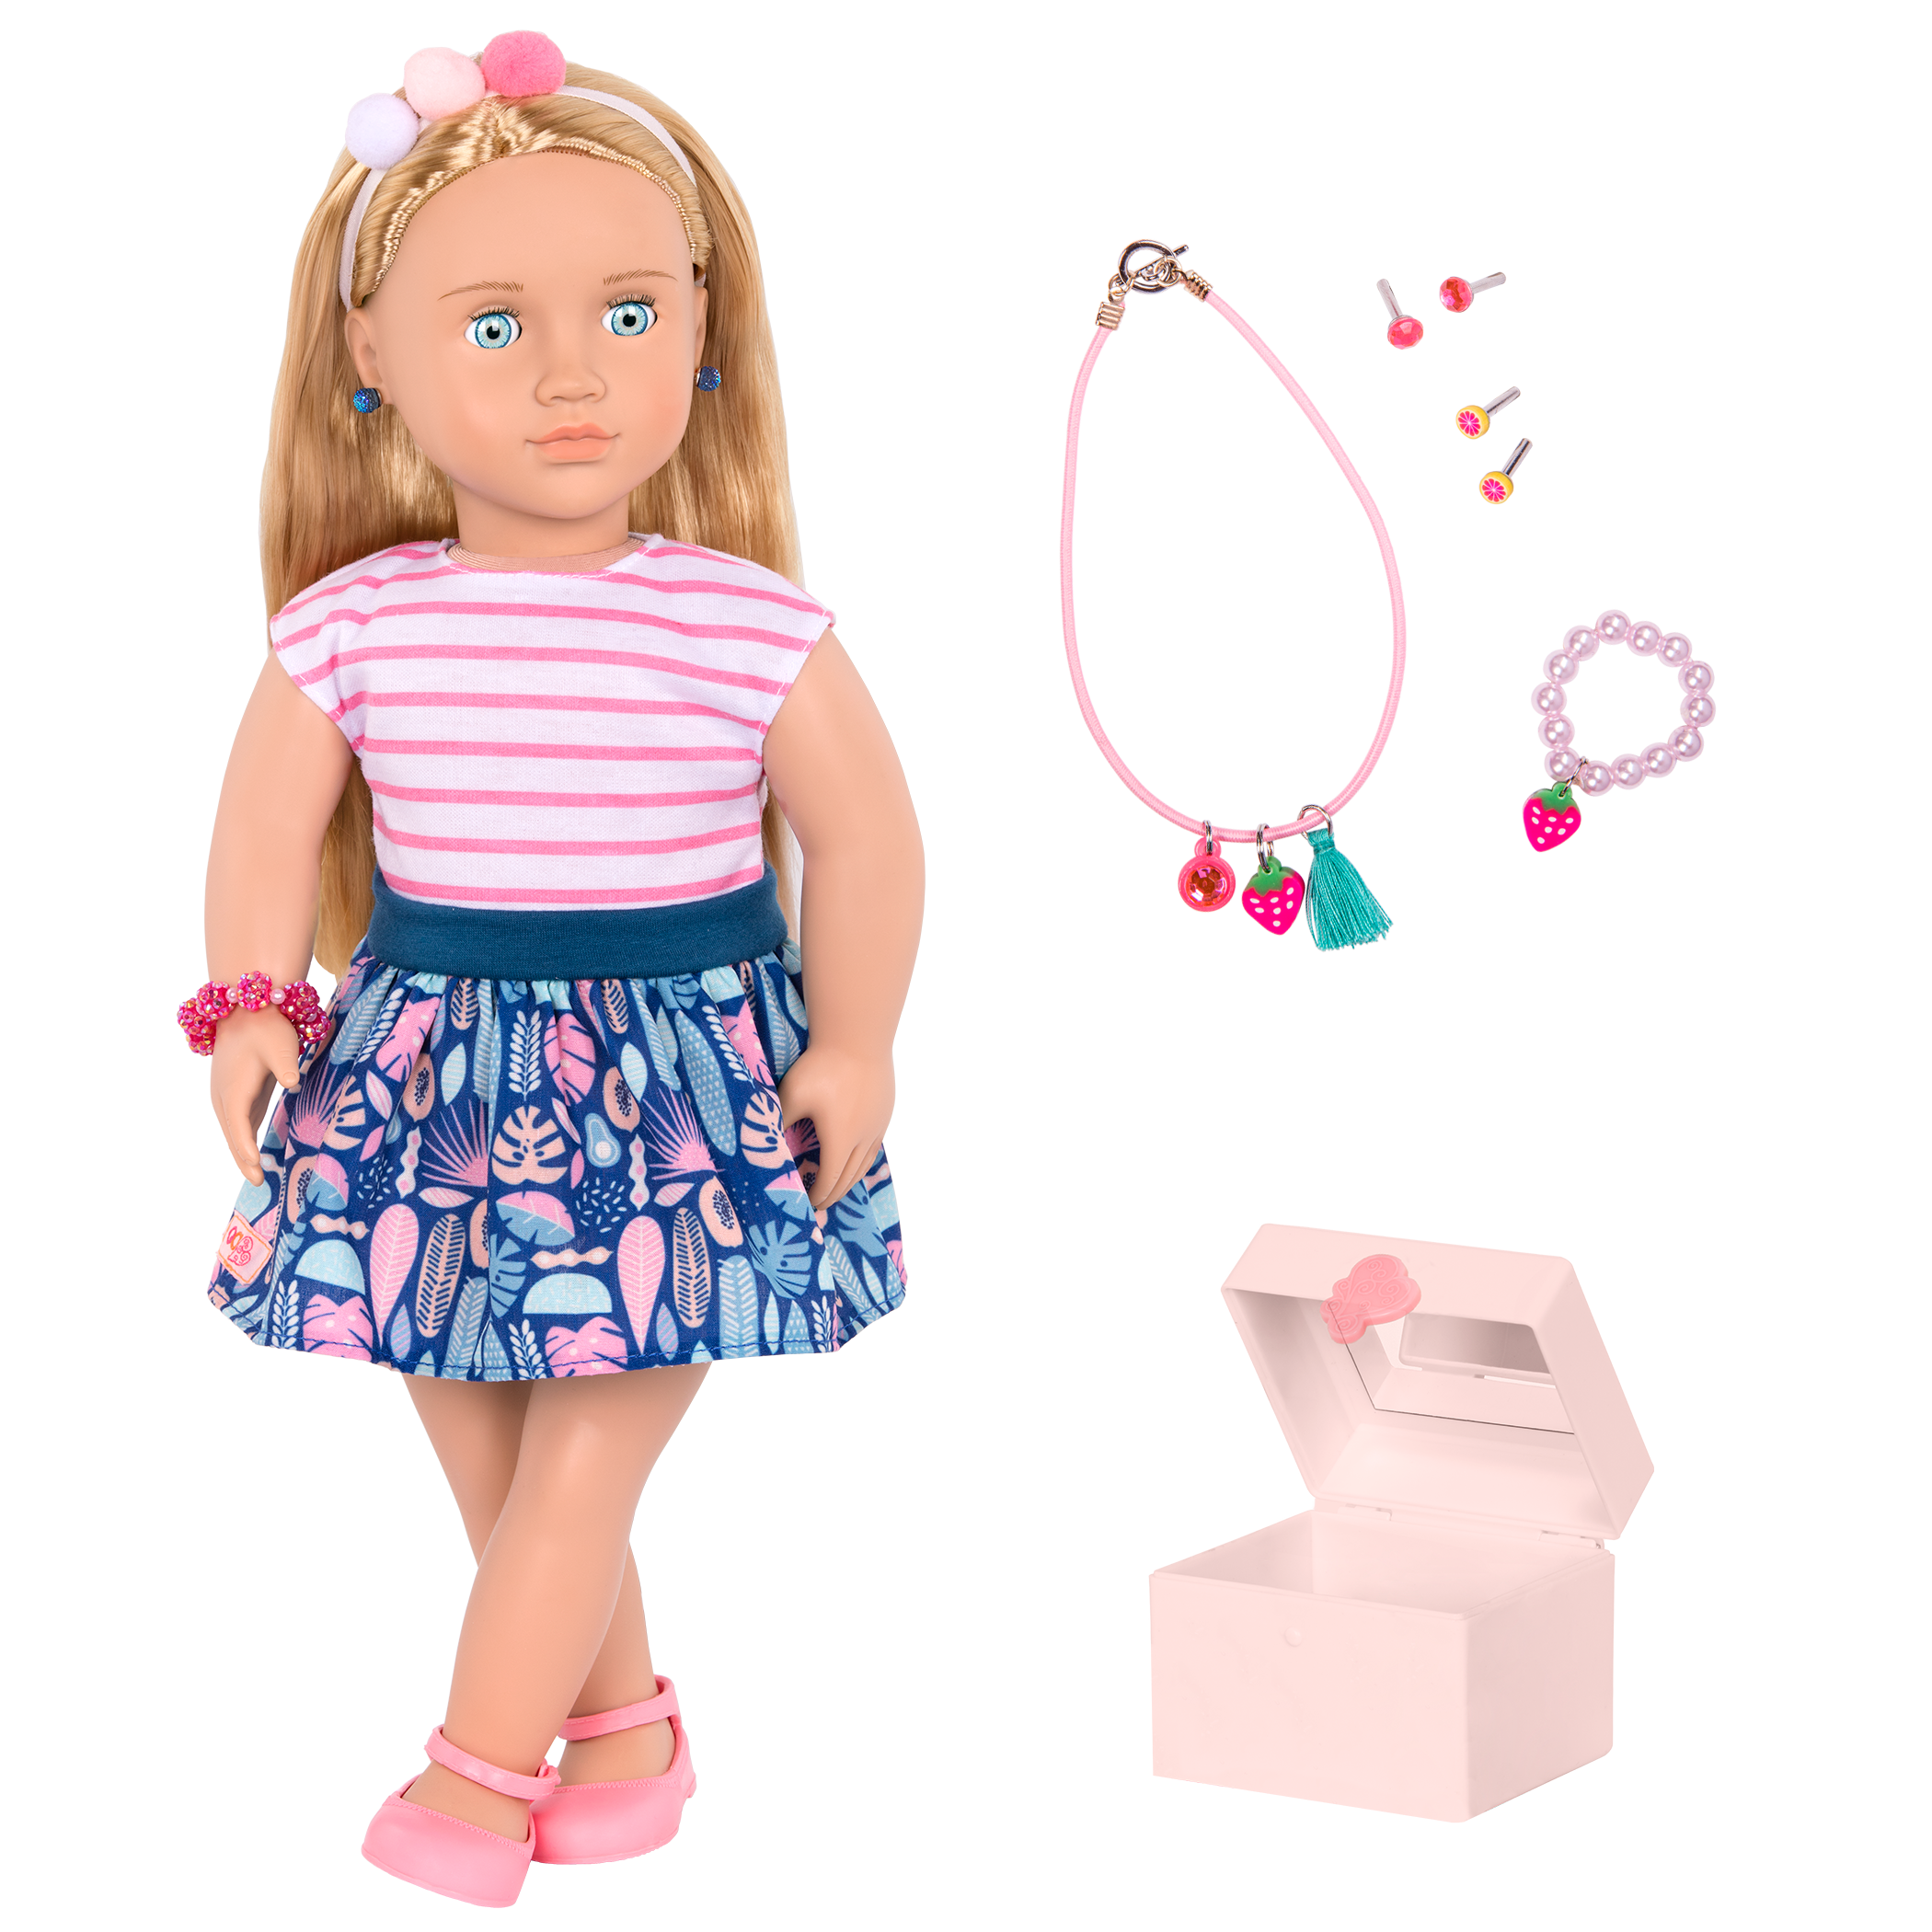 18-inch doll with blonde hair, pale blue eyes, jewelry and box